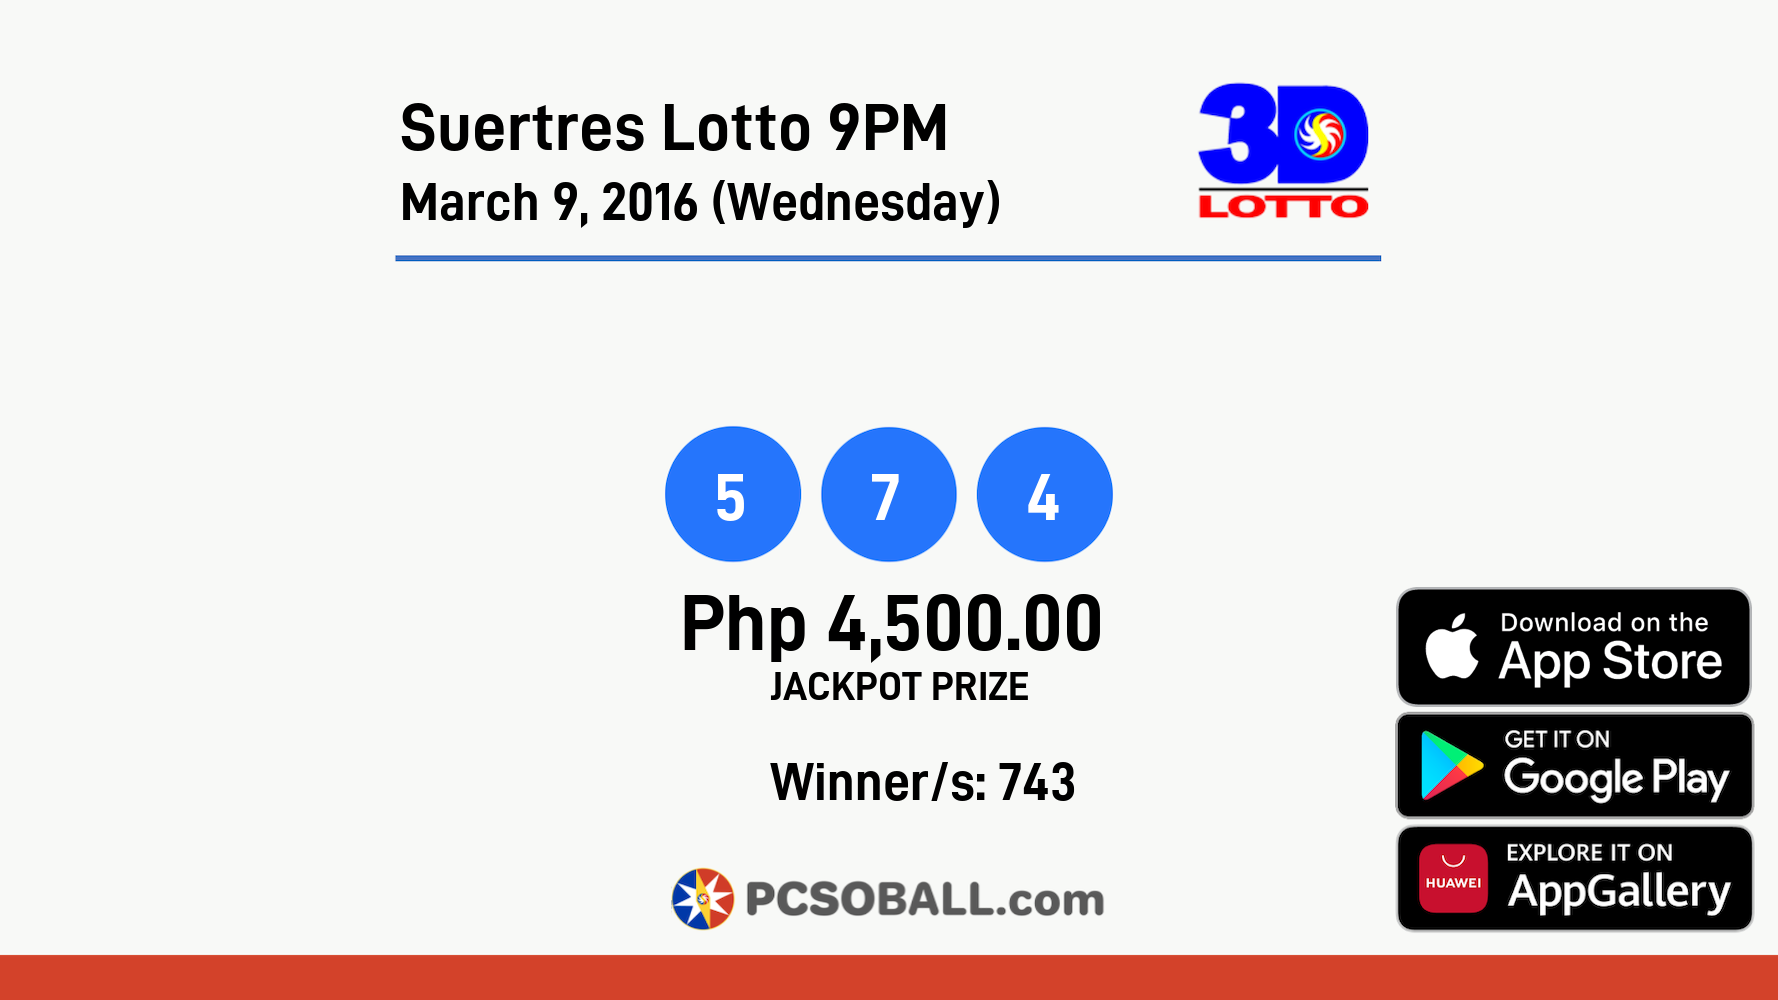 Suertres Lotto 9PM March 9, 2016 (Wednesday) Result